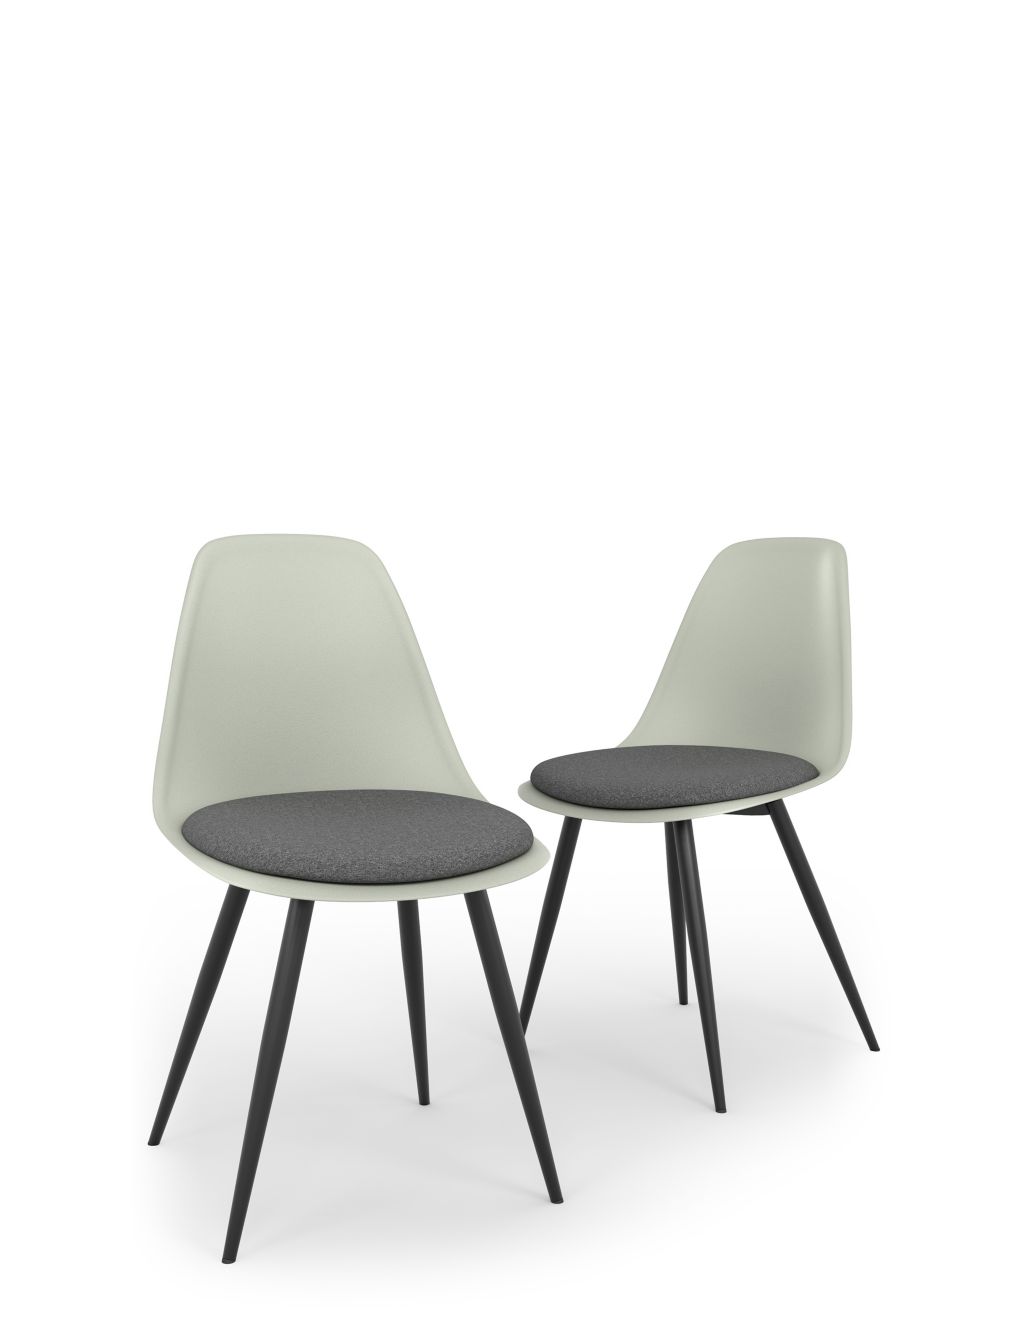 Set of 2 Arnie Dining Chairs image 2